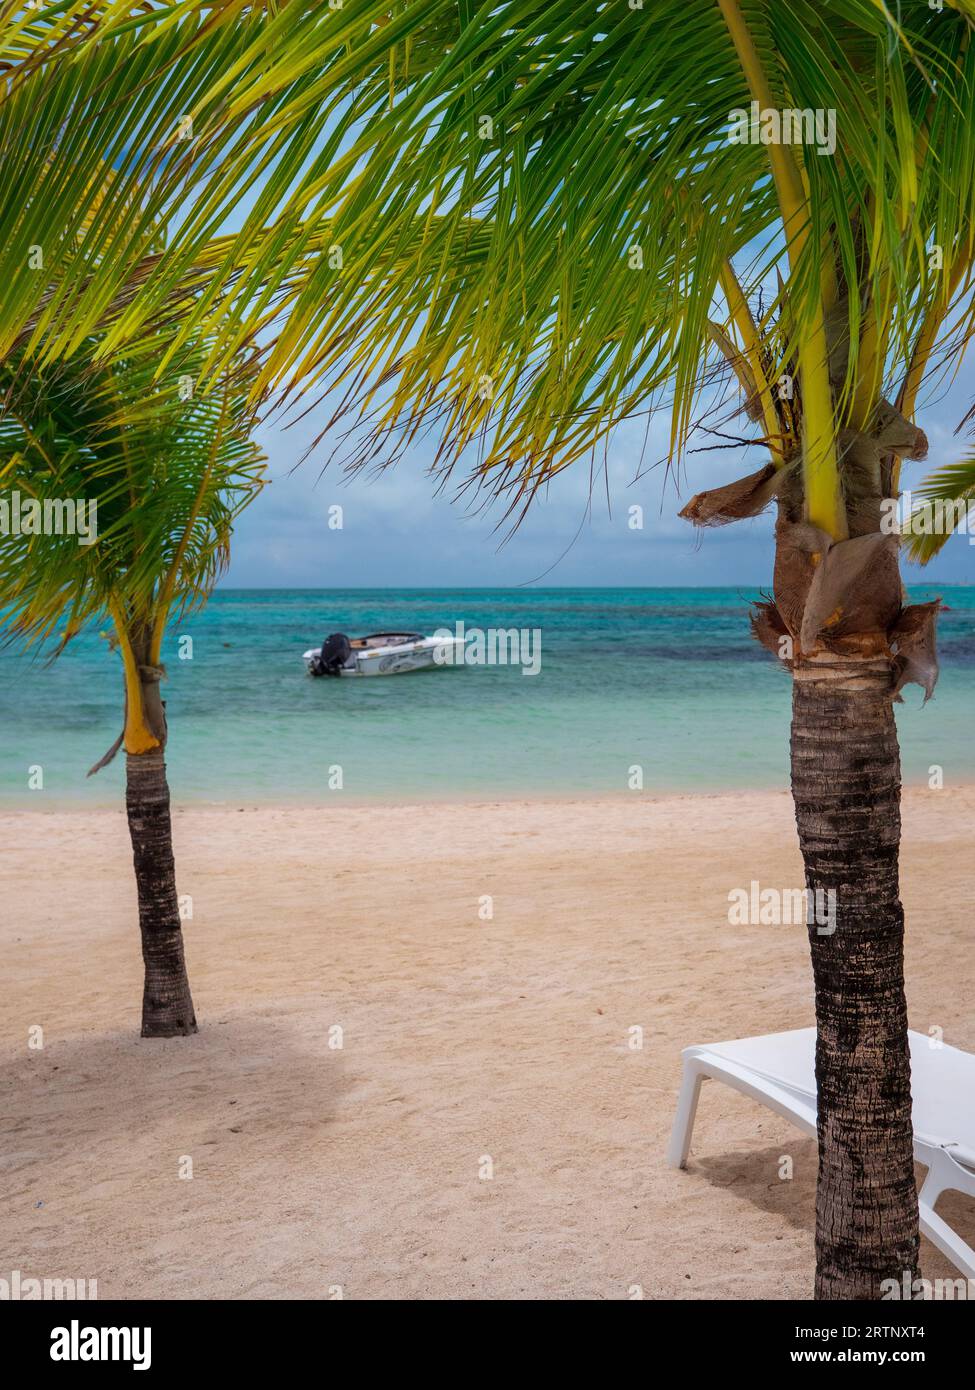 A speedboat on a turquoise ocean between two palm trees in Mauritius Stock Photo